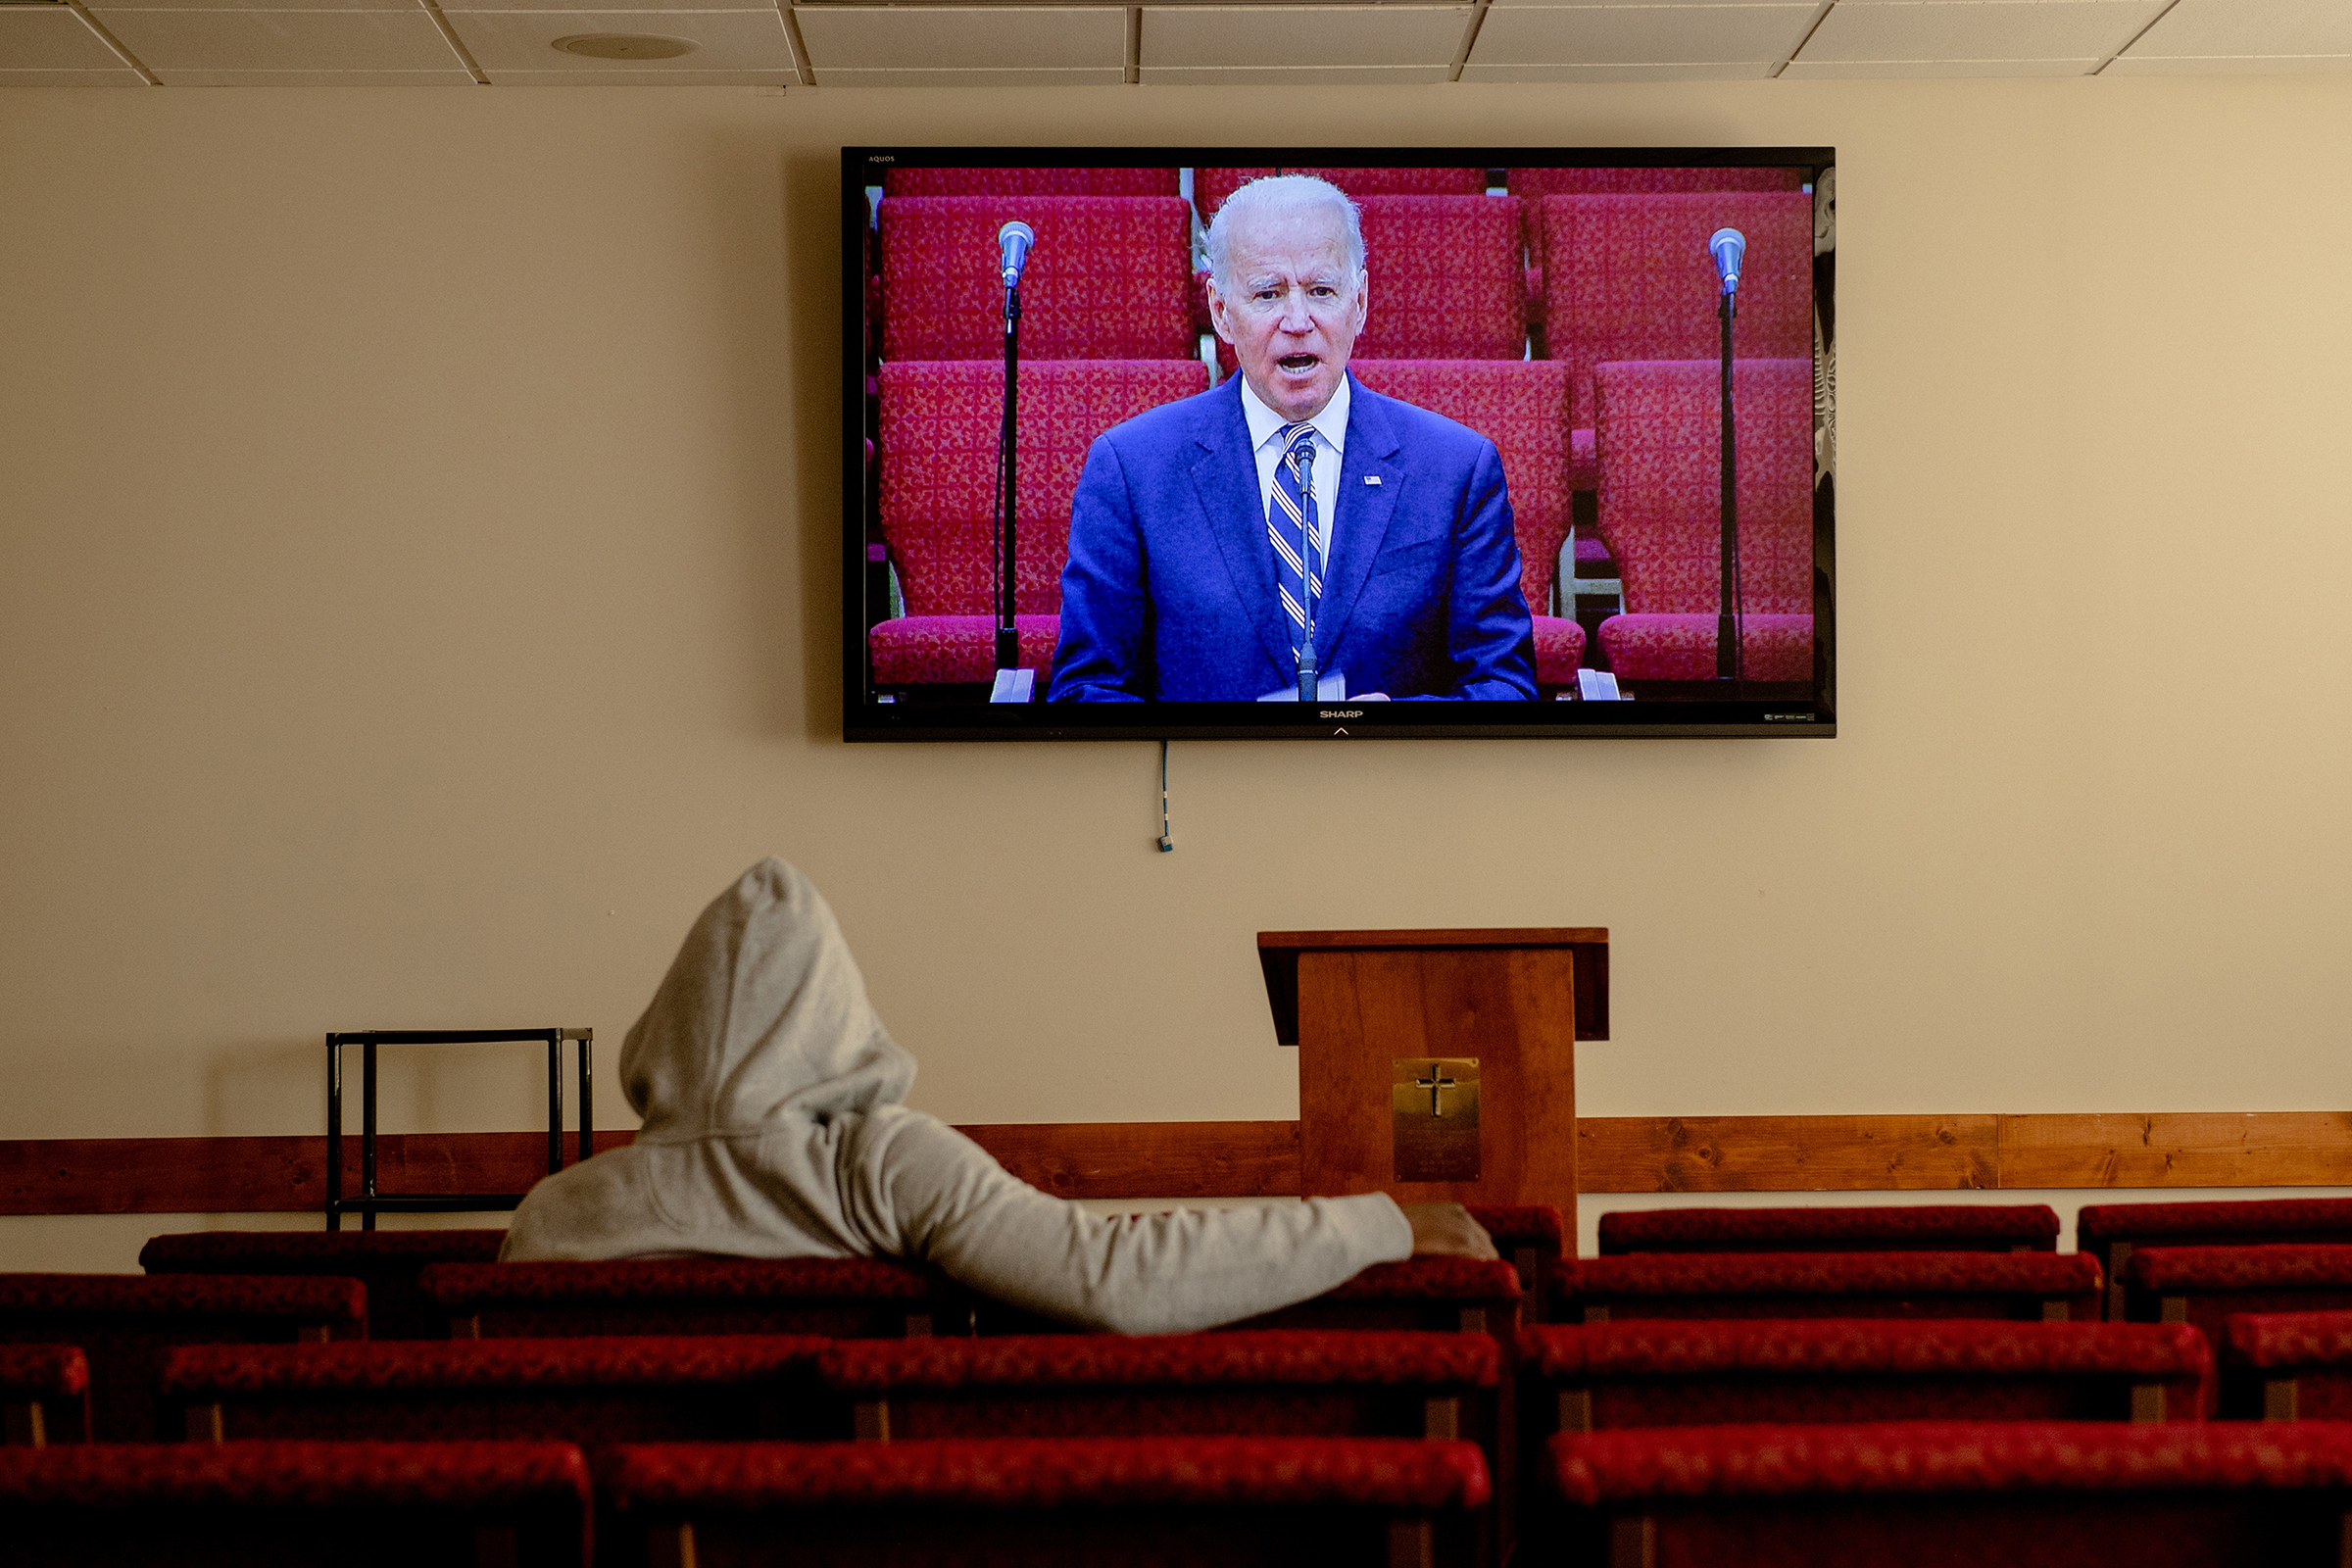 A screen shows Democratic presidential candidate Joe Biden during a service at Royal Missionary Baptist Church in North Charleston, S.C., on Feb. 23, 2020.